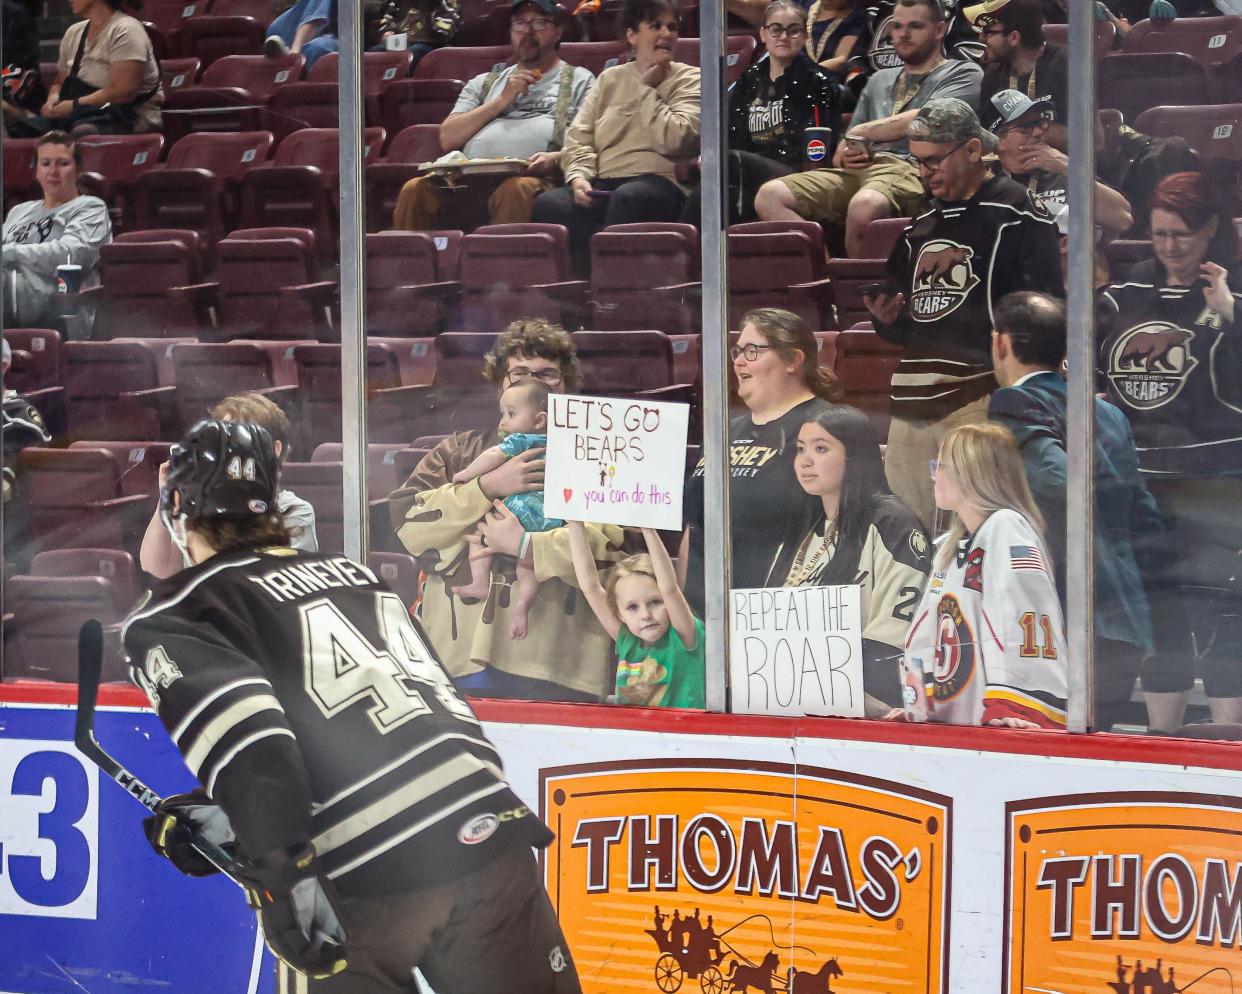 The fans cheer on the Bears during warmups Wednesday during Game 1 of Hershey's playoff series vs. Lehigh Valley. After Saturday's Game 2 victory, the Bears now hold a two-game lead.